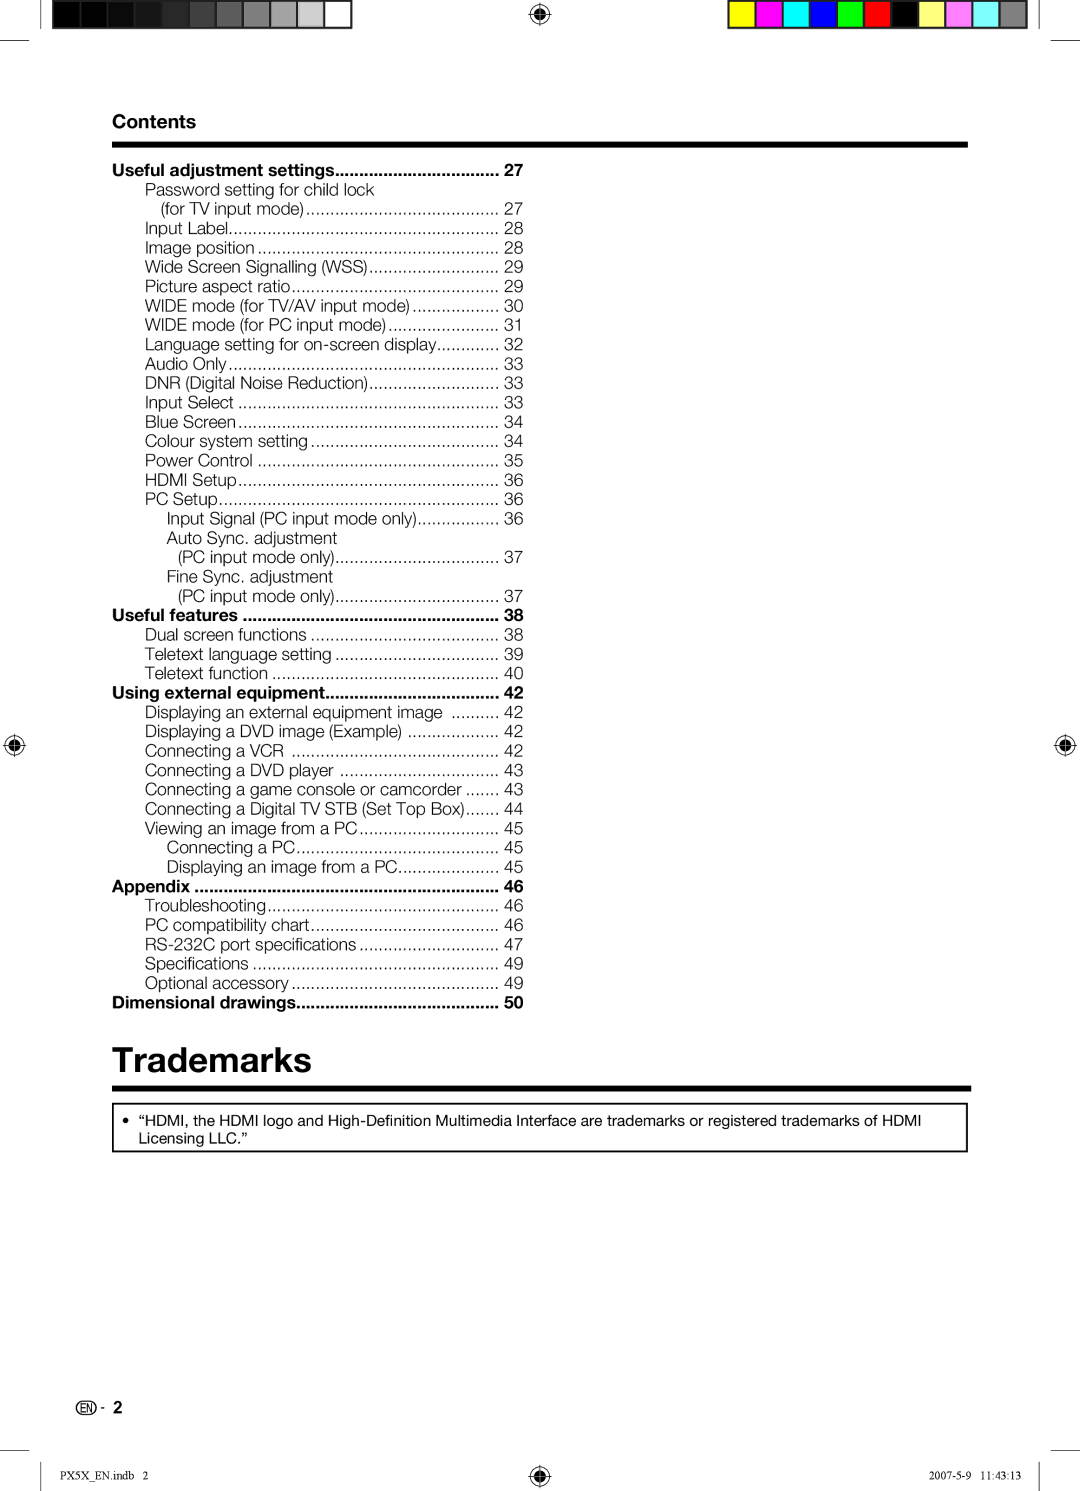 Sharp LC-46PX5X operation manual Trademarks, Contents 